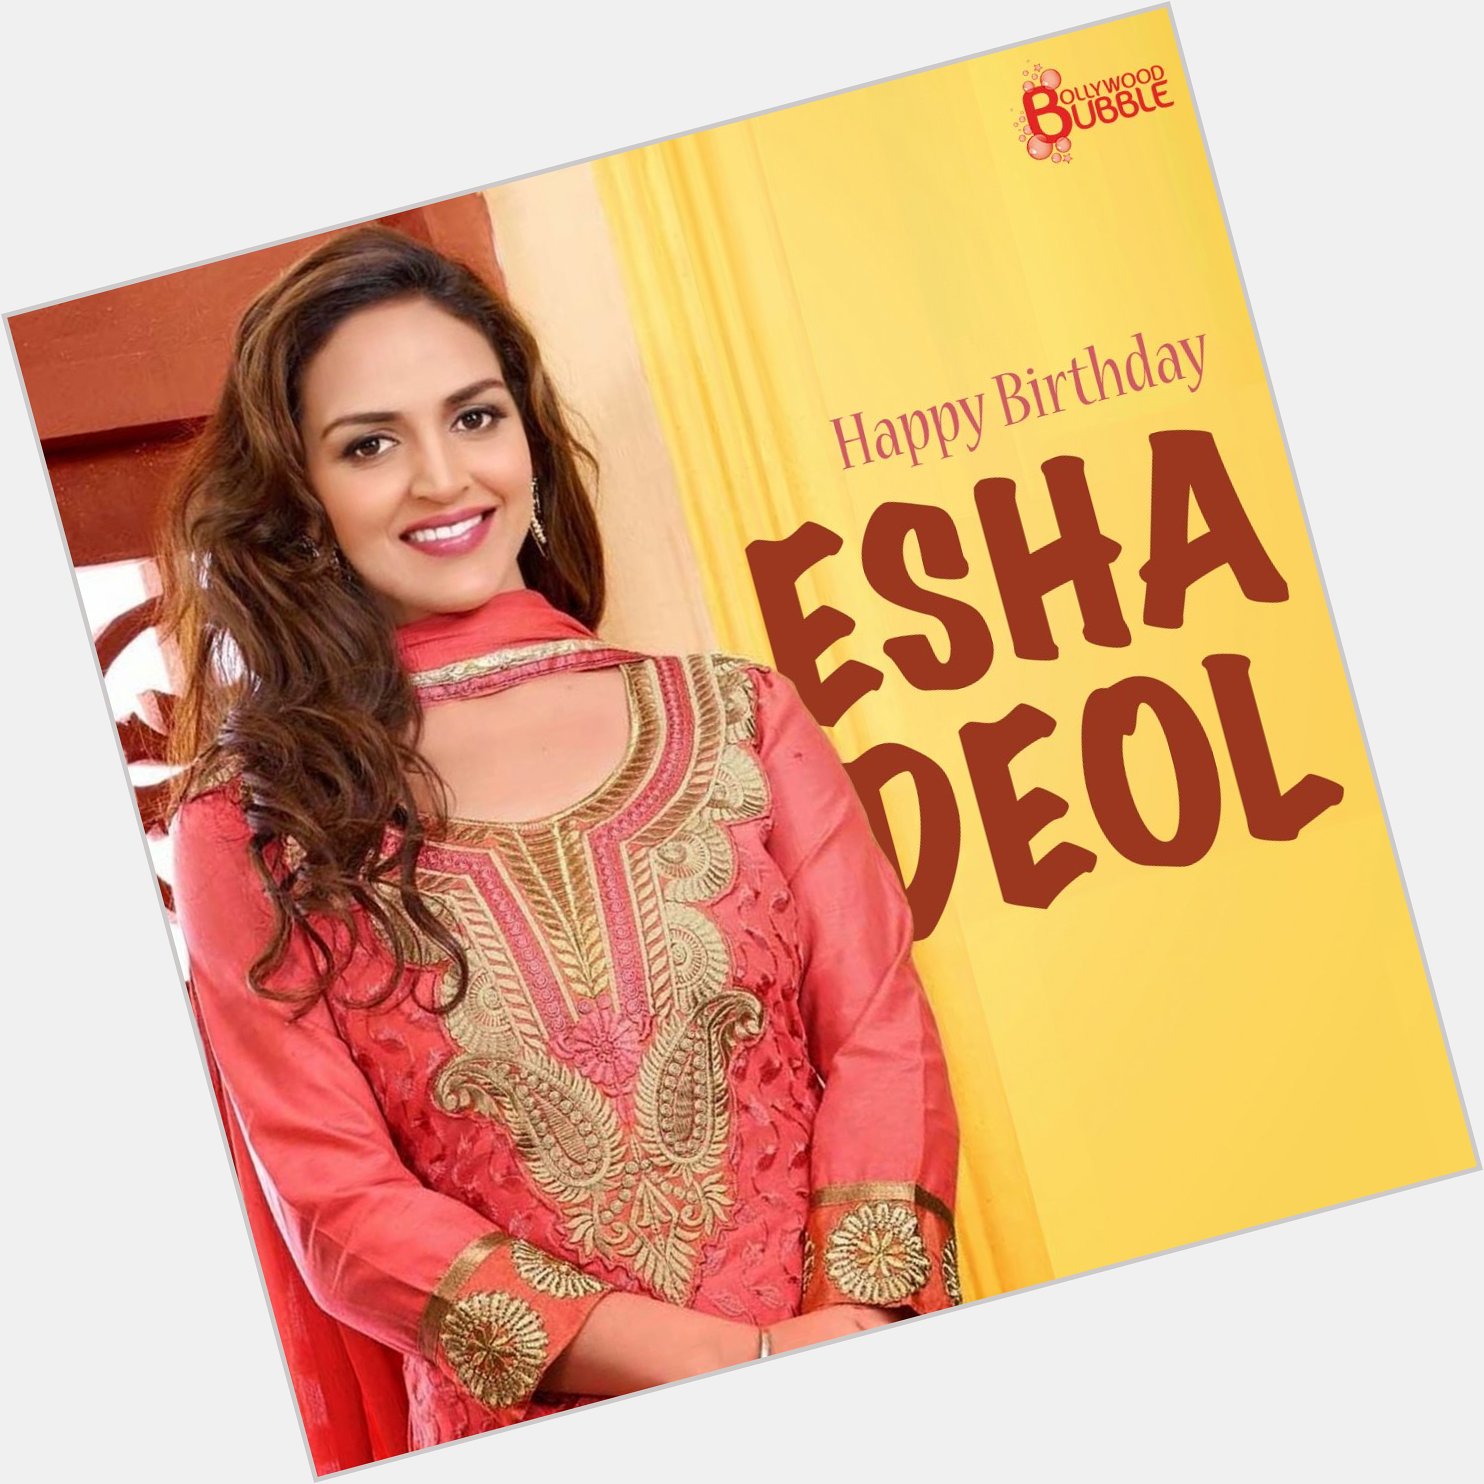 Bollybubble: Here are some vibrant wishes for the new-mommy! Happy Birthday, Esha_Deol 